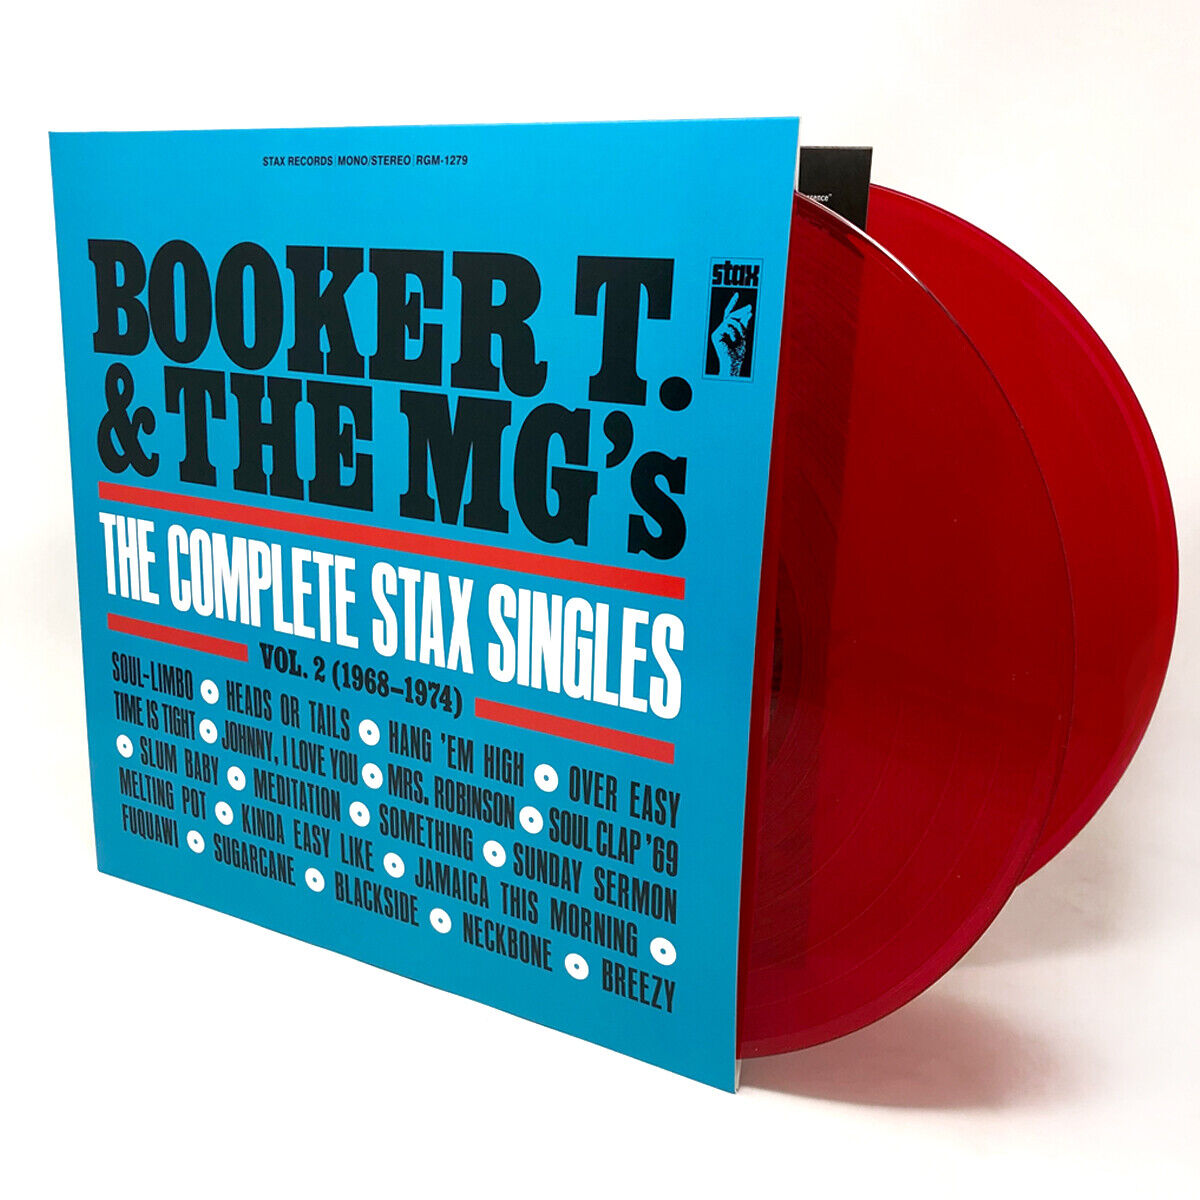 The Complete Stax Singles Vol. 1 (1968-1974) [Red Vinyl)